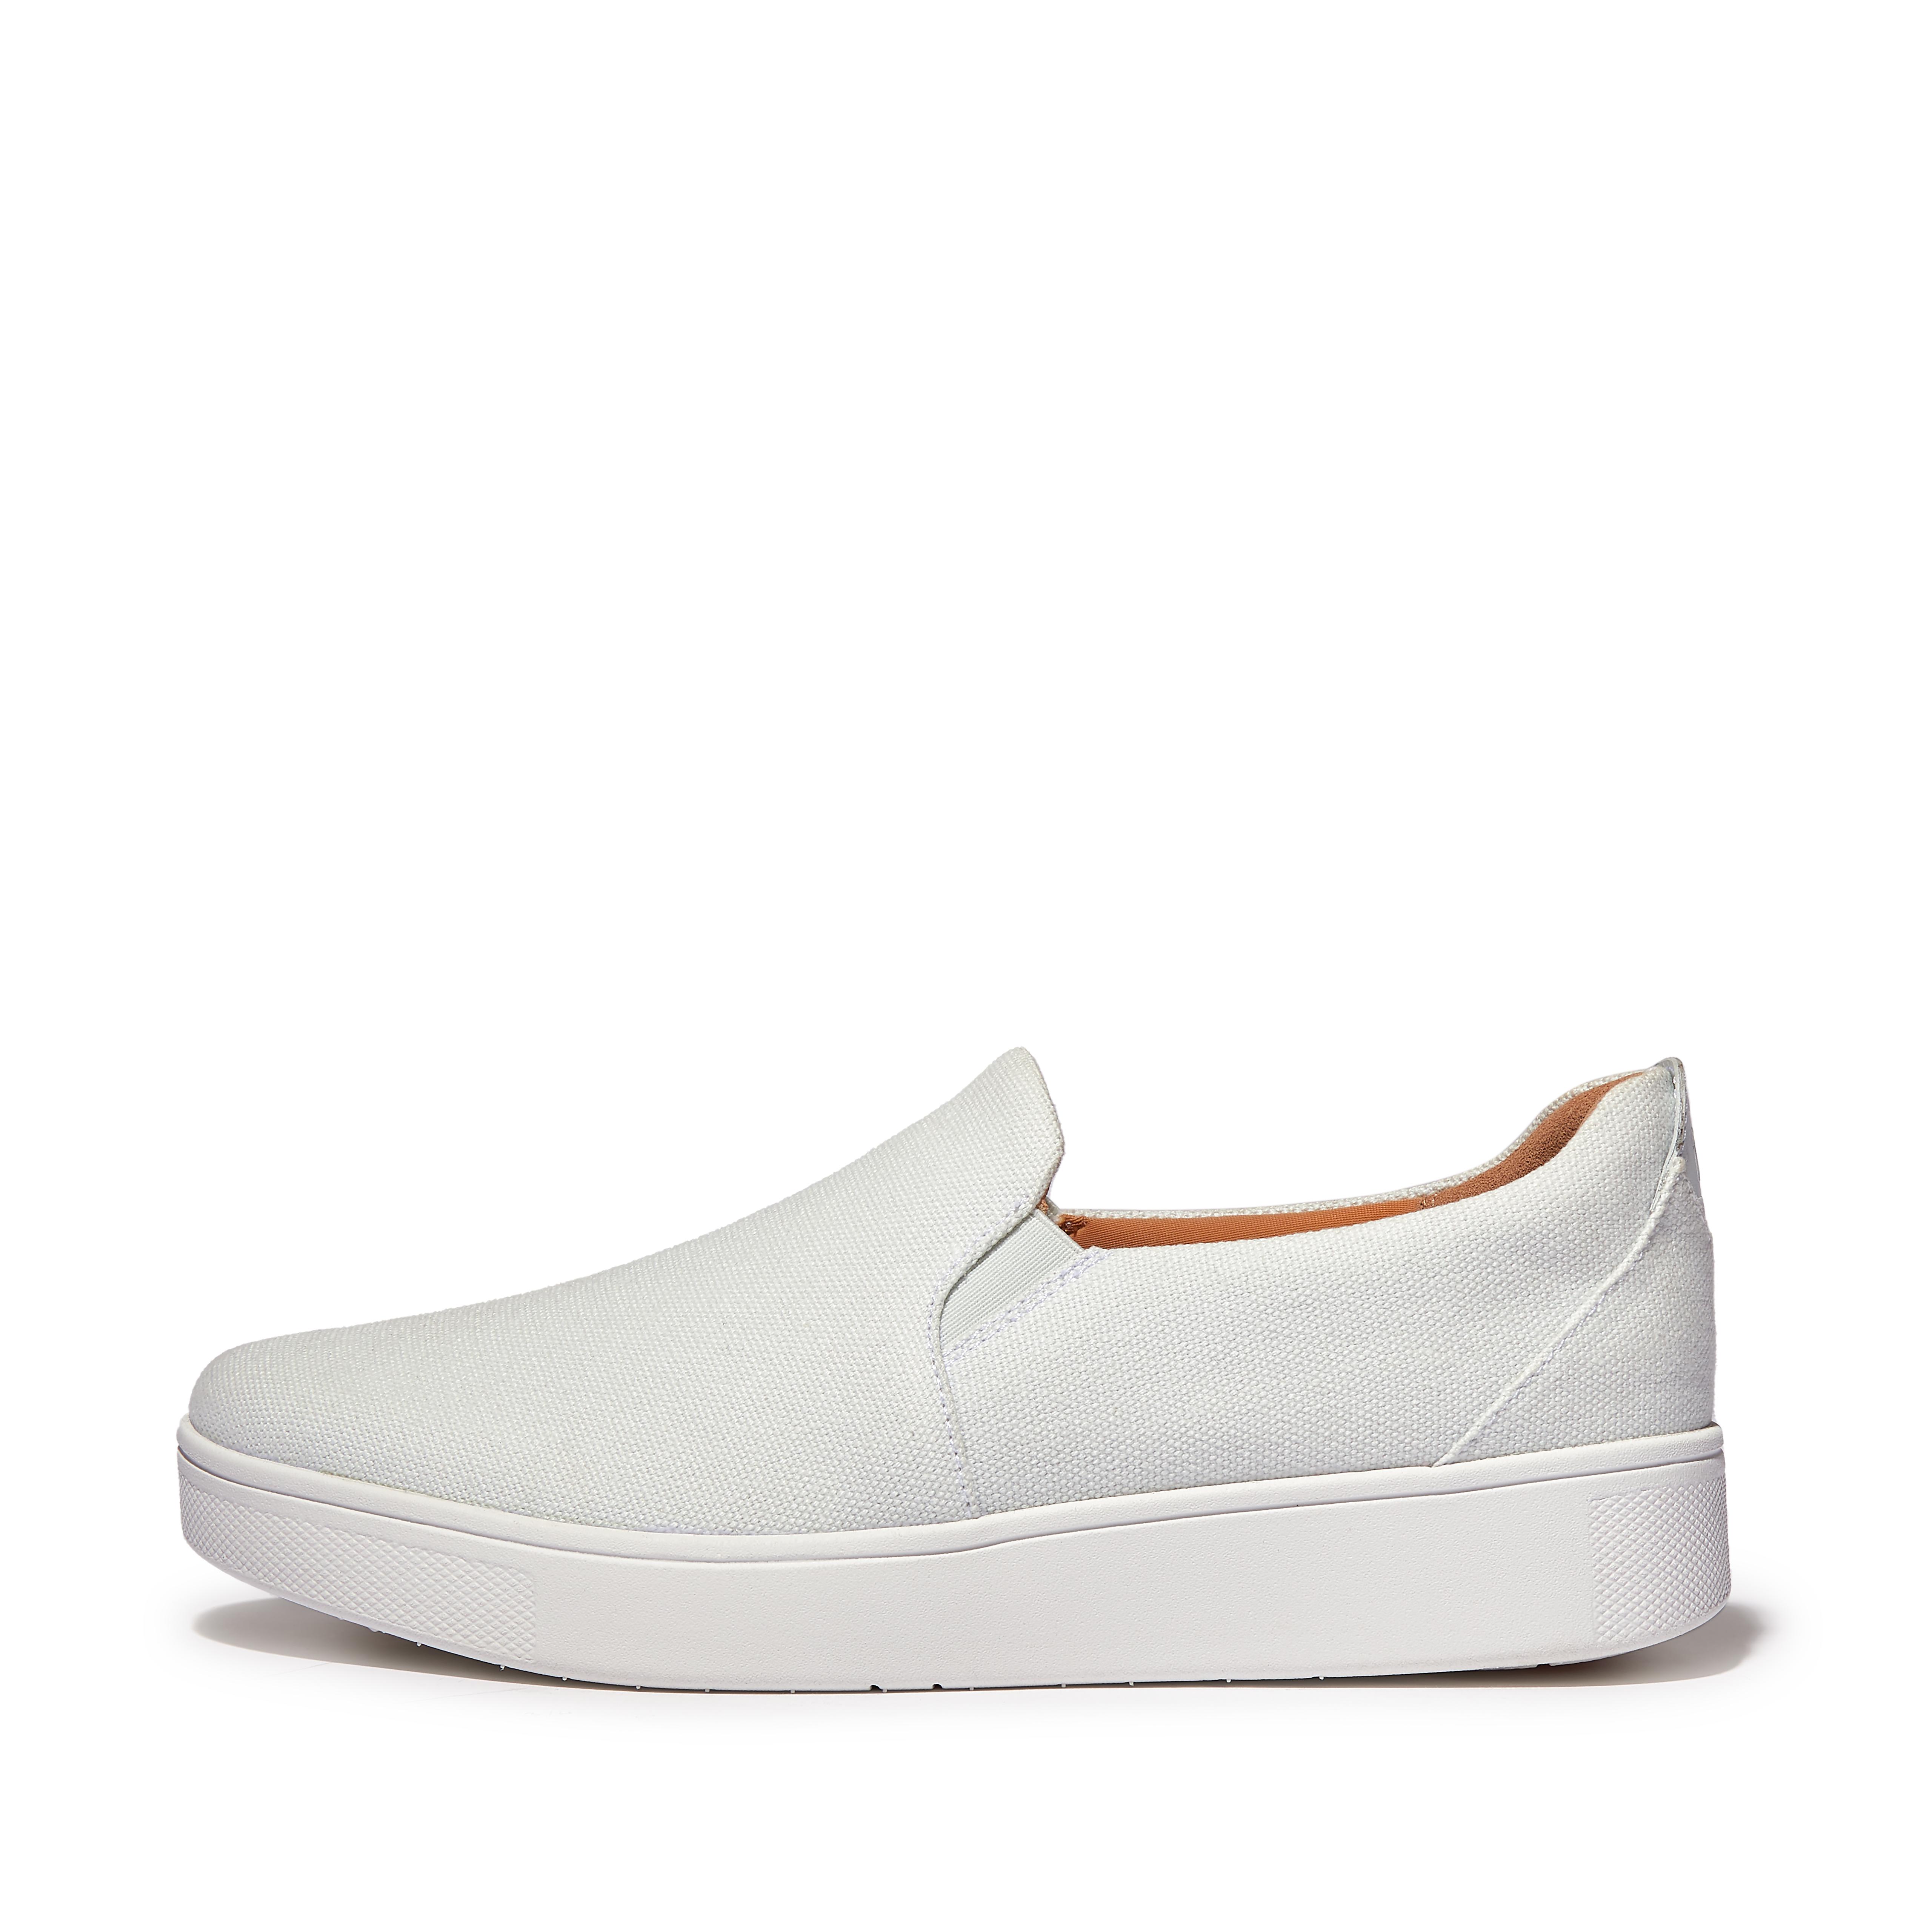 Women's Trainers, Canvas, Slip On & Skater Trainers